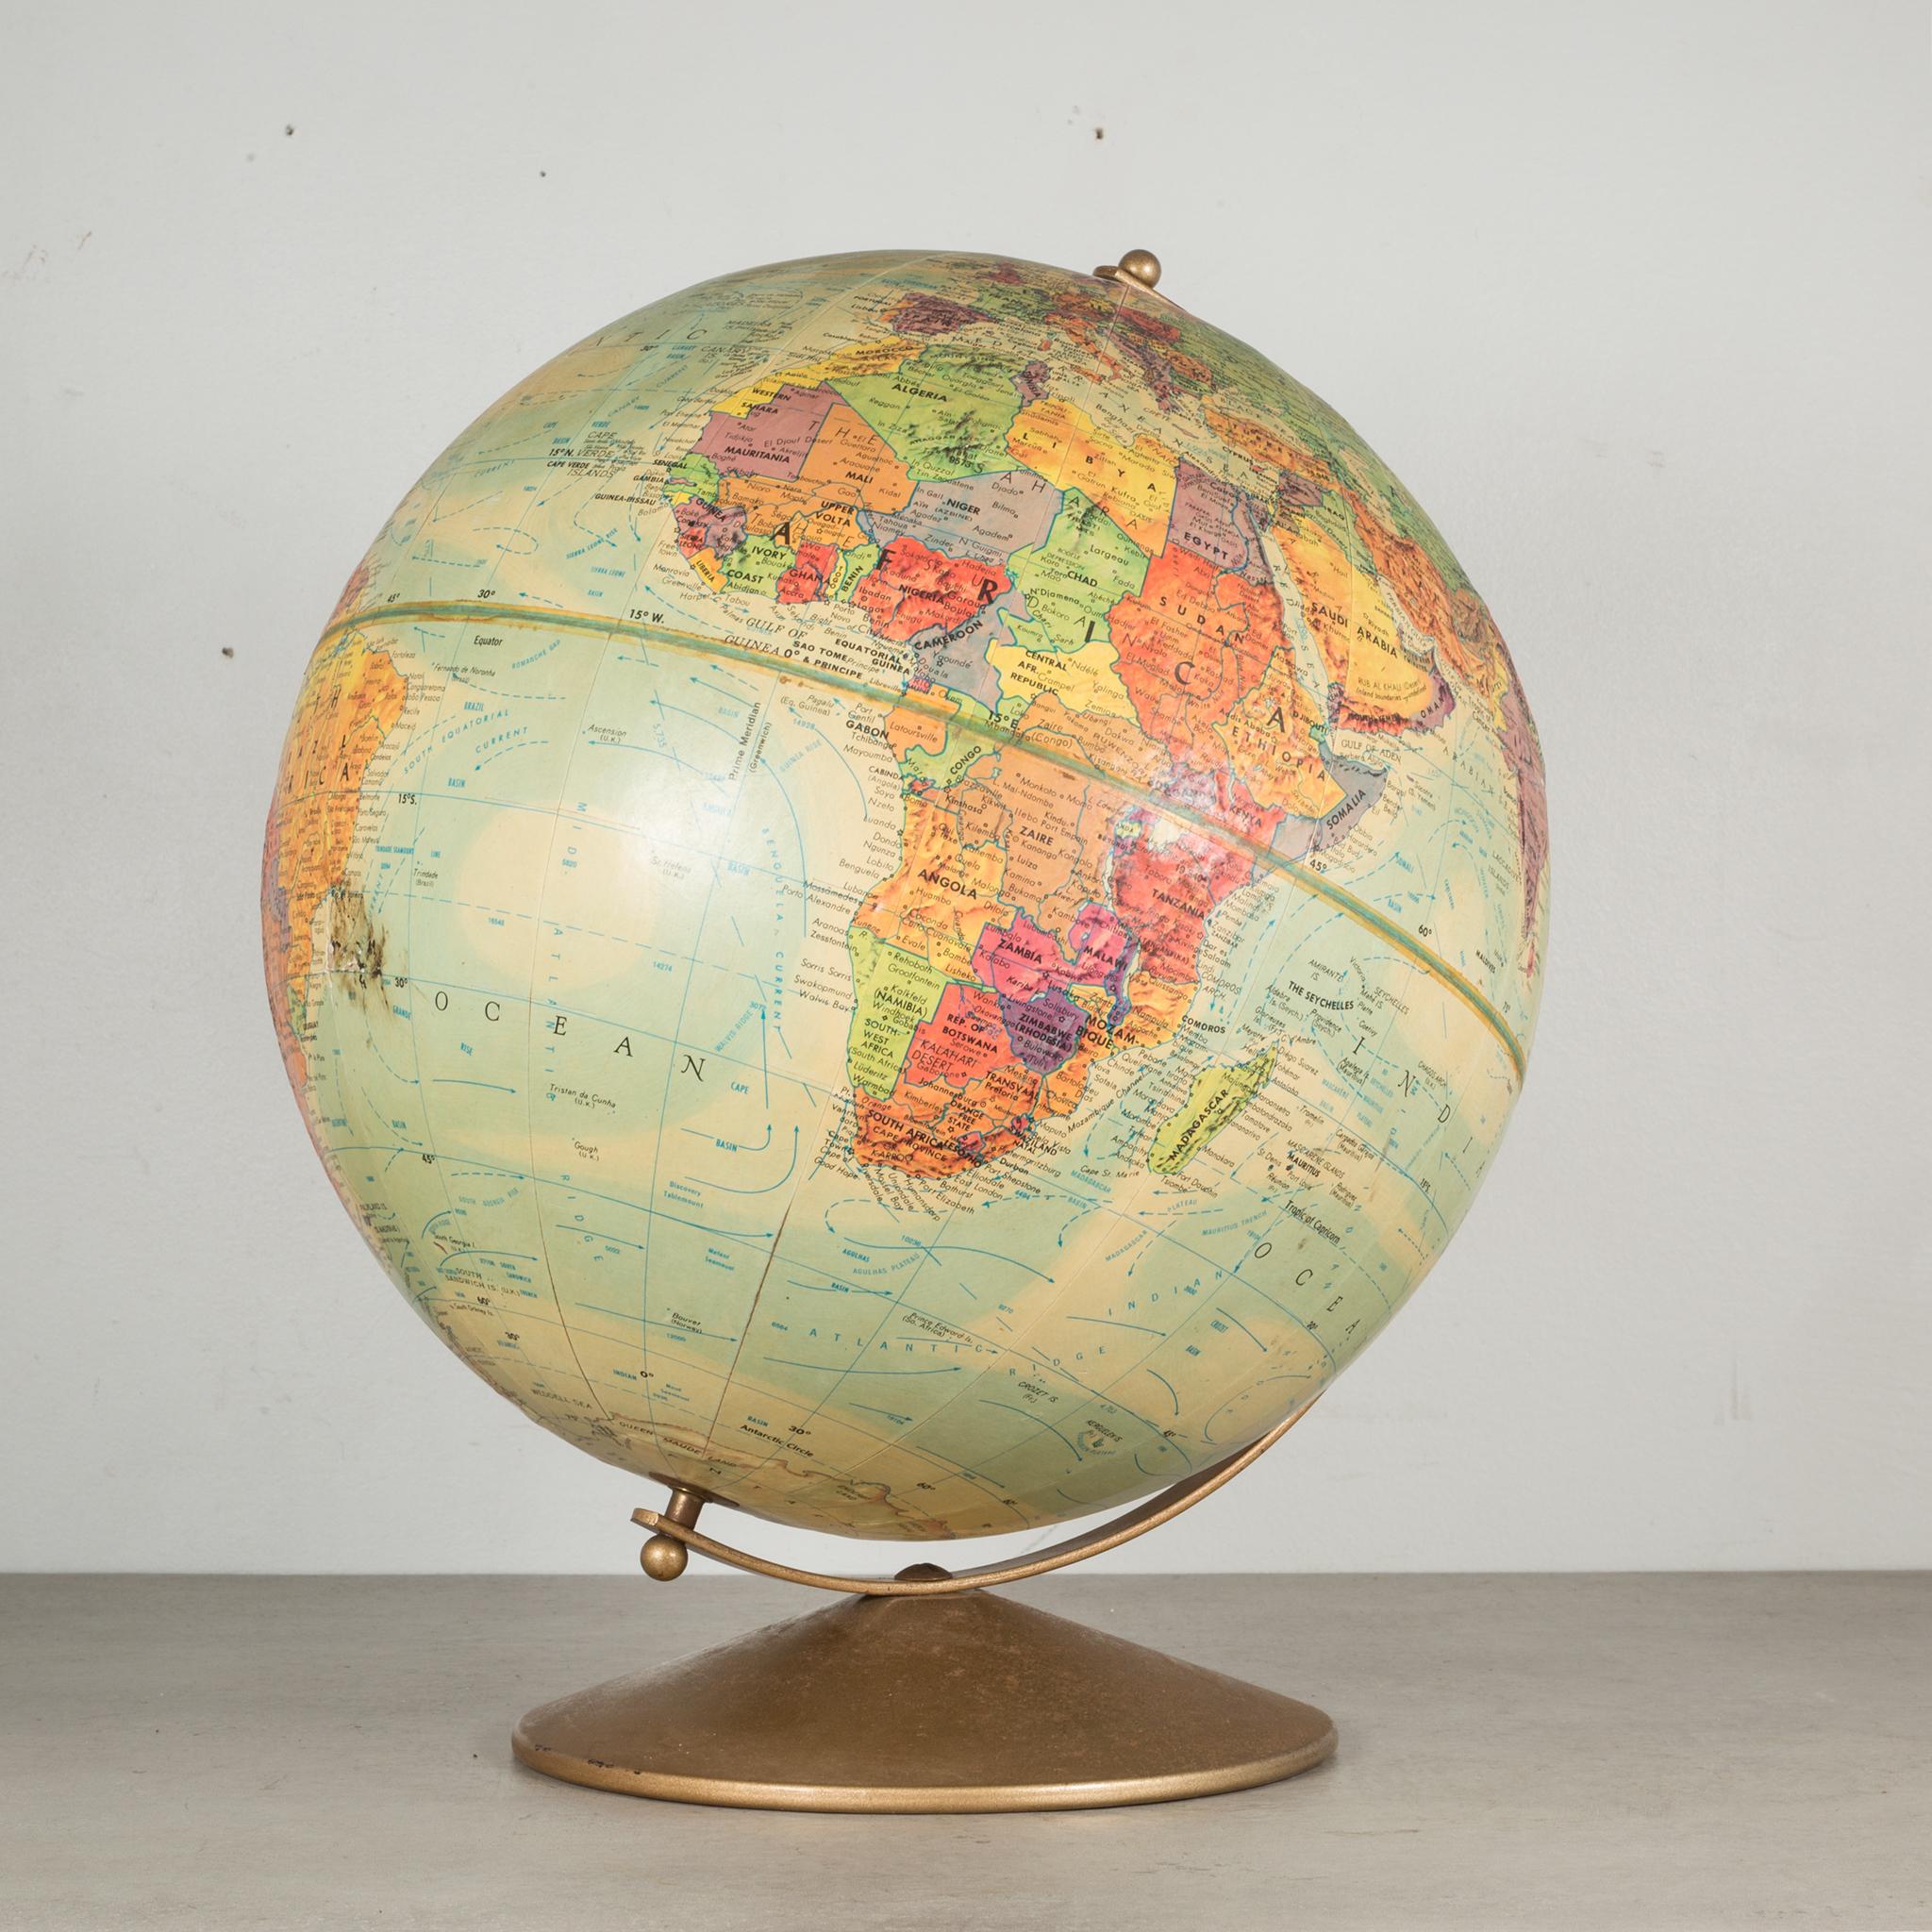 About

A vintage Replogle standard globe on a round metal base with brass plated bracket. This piece has retained its original color and finish.

Creator Replogle Globes, Chicago, IL
Date of manufacture circa 1970s.
Materials and techniques